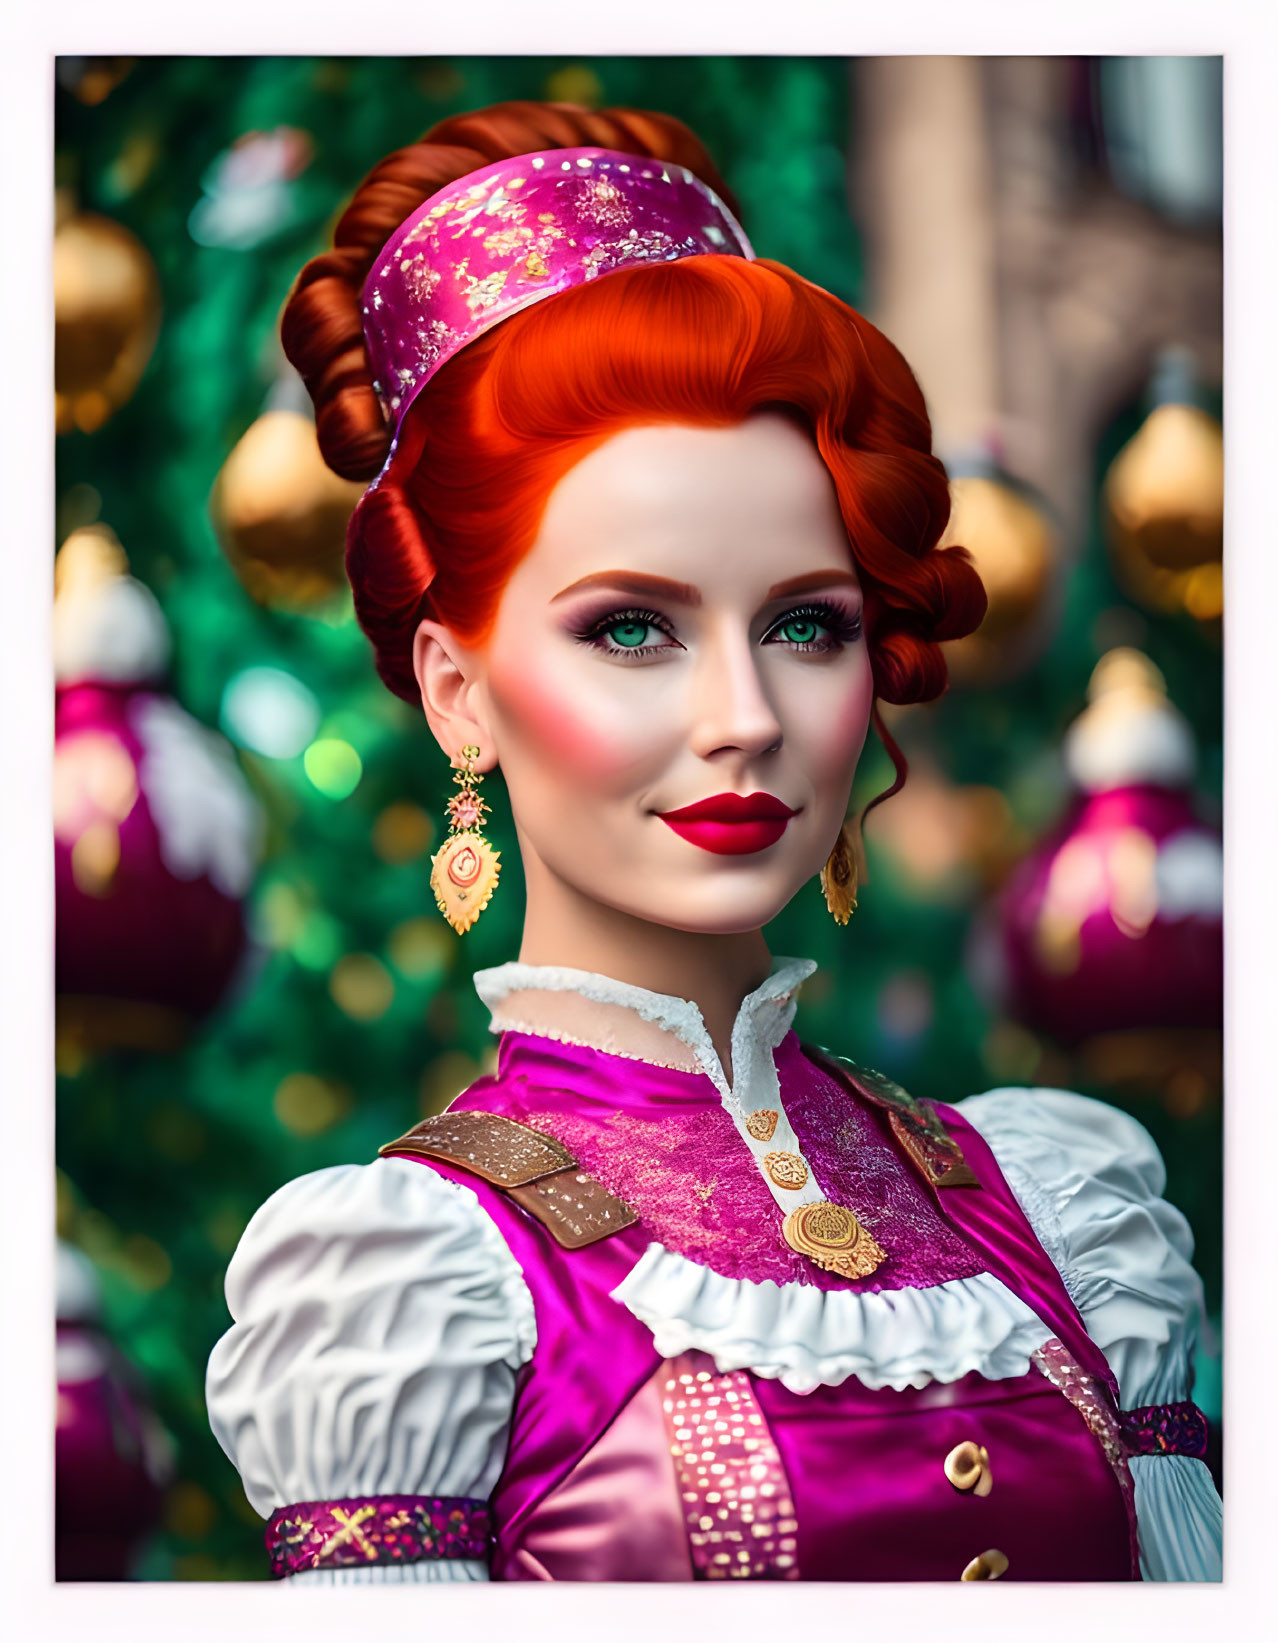 Vibrant red-haired woman in traditional folk attire with gold earrings.